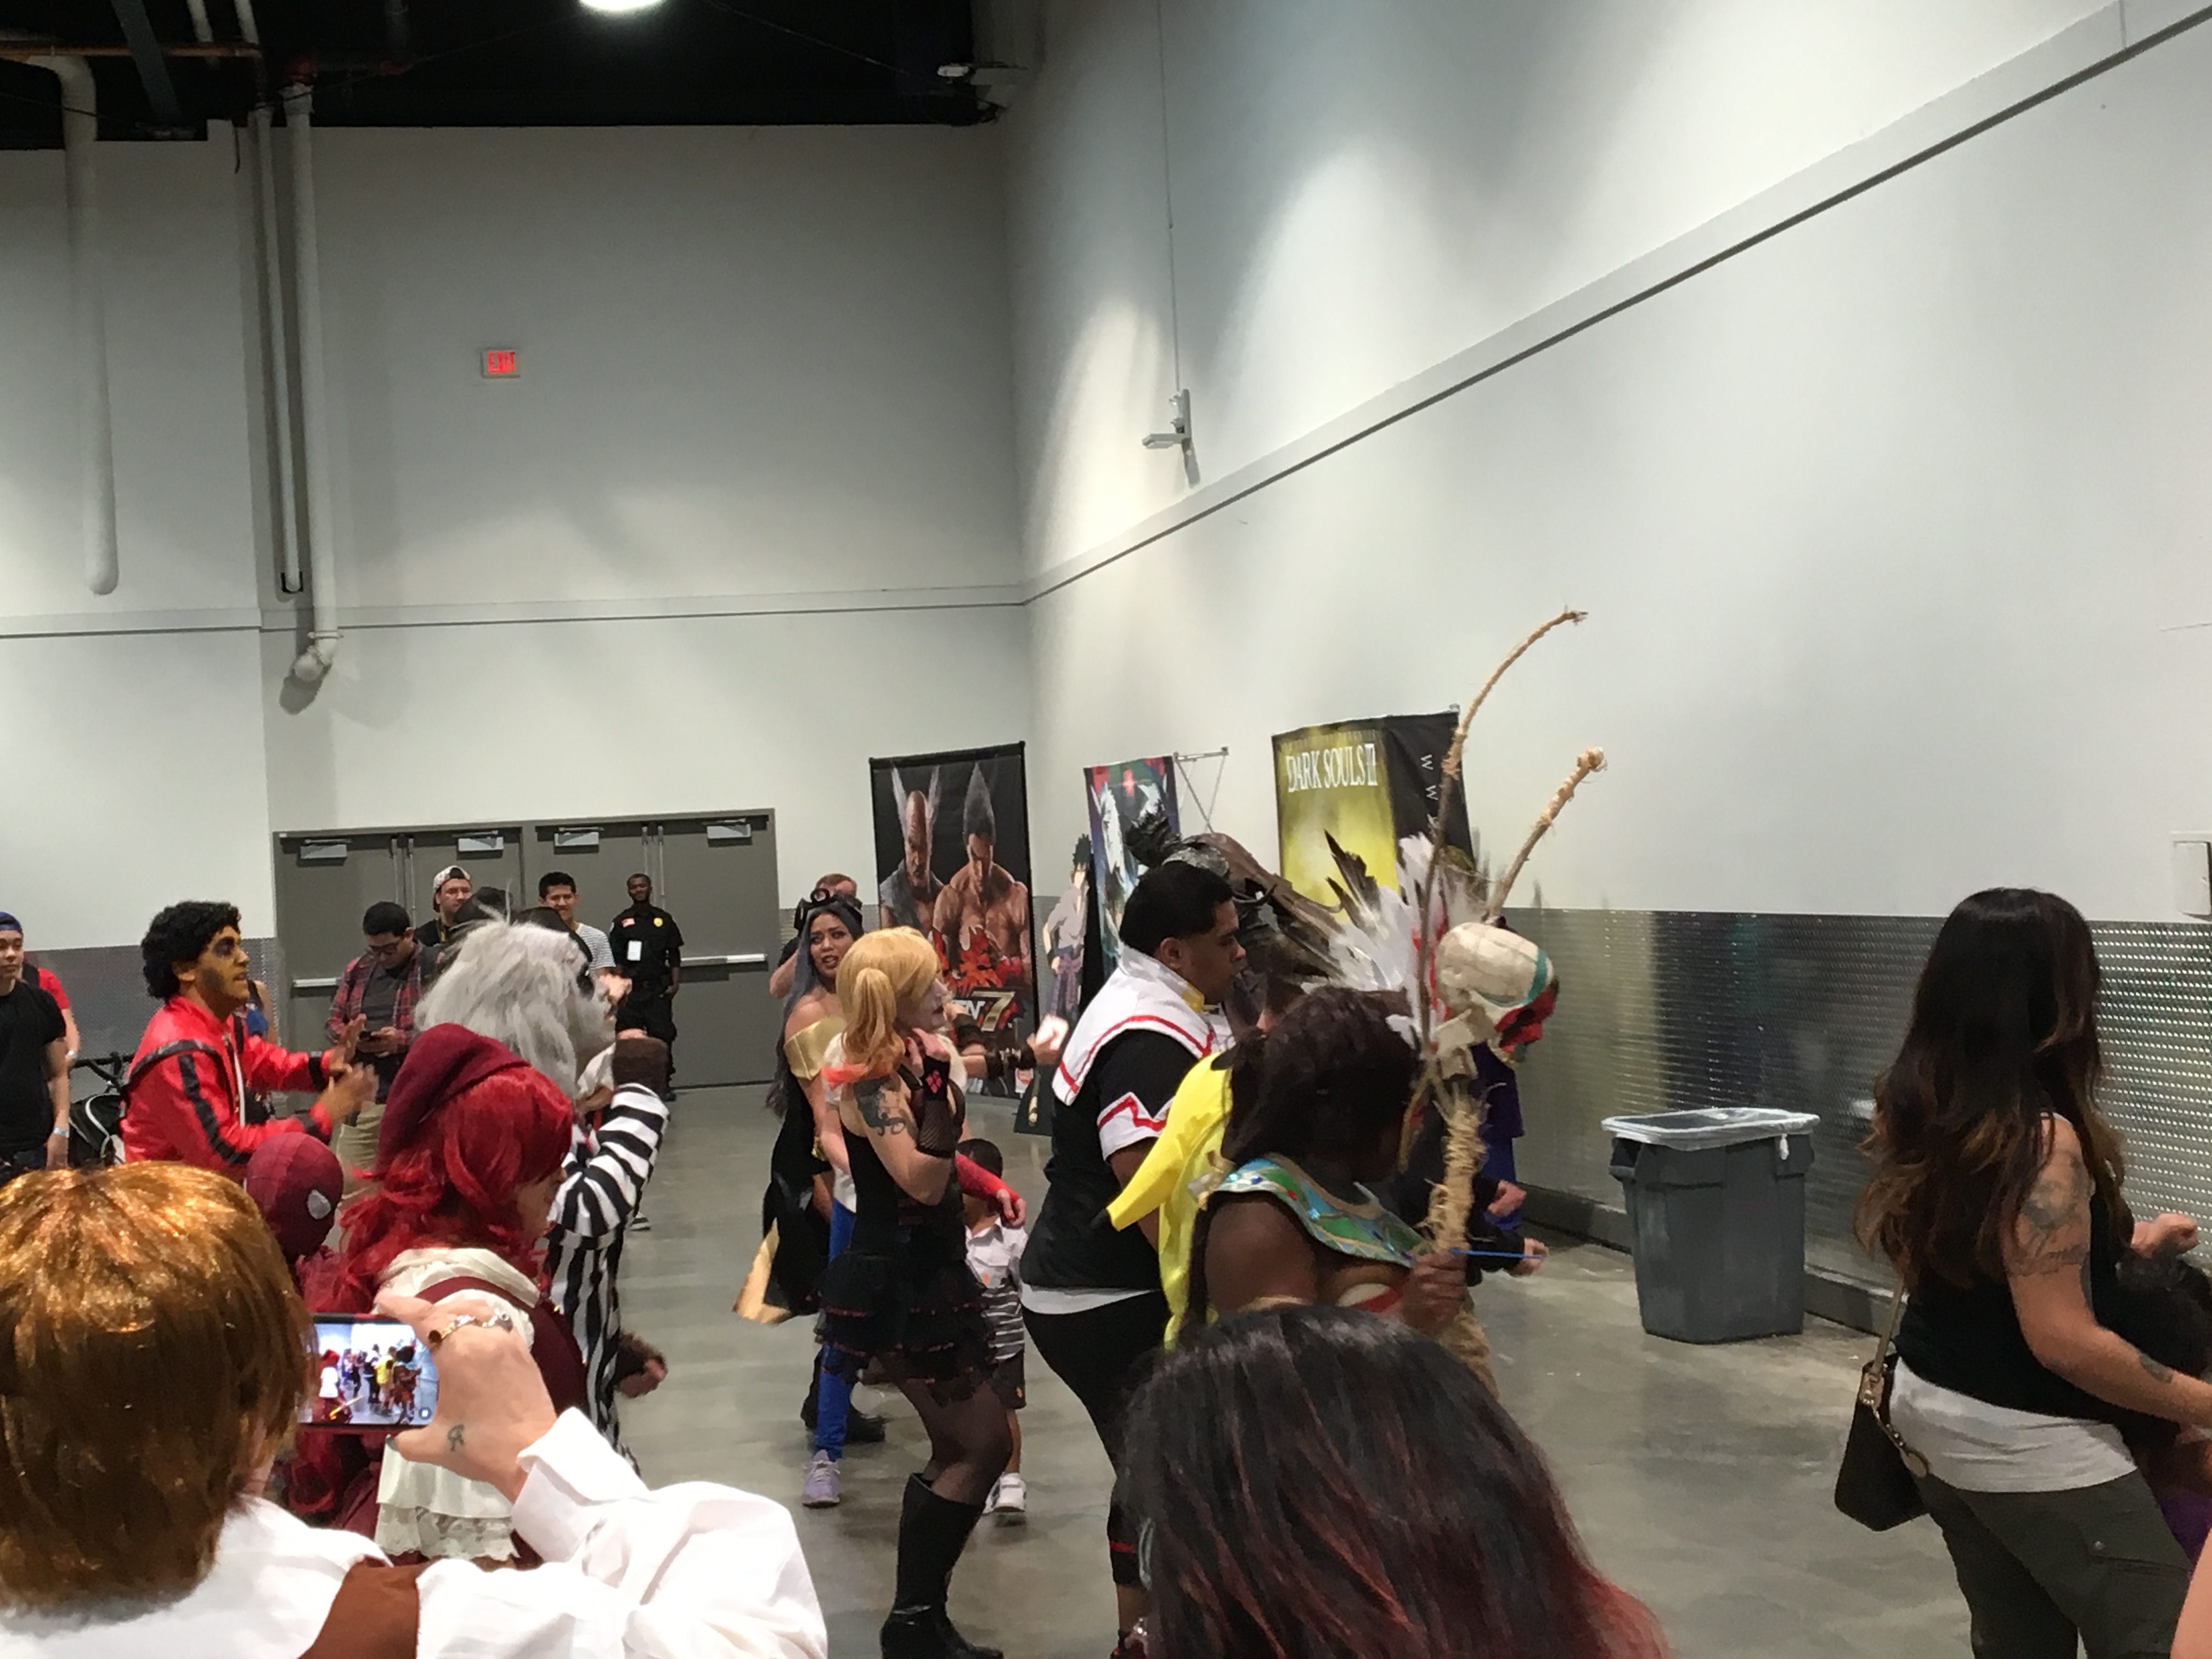 Cosplayers gather and dance together to the wobble, as many others are entertained